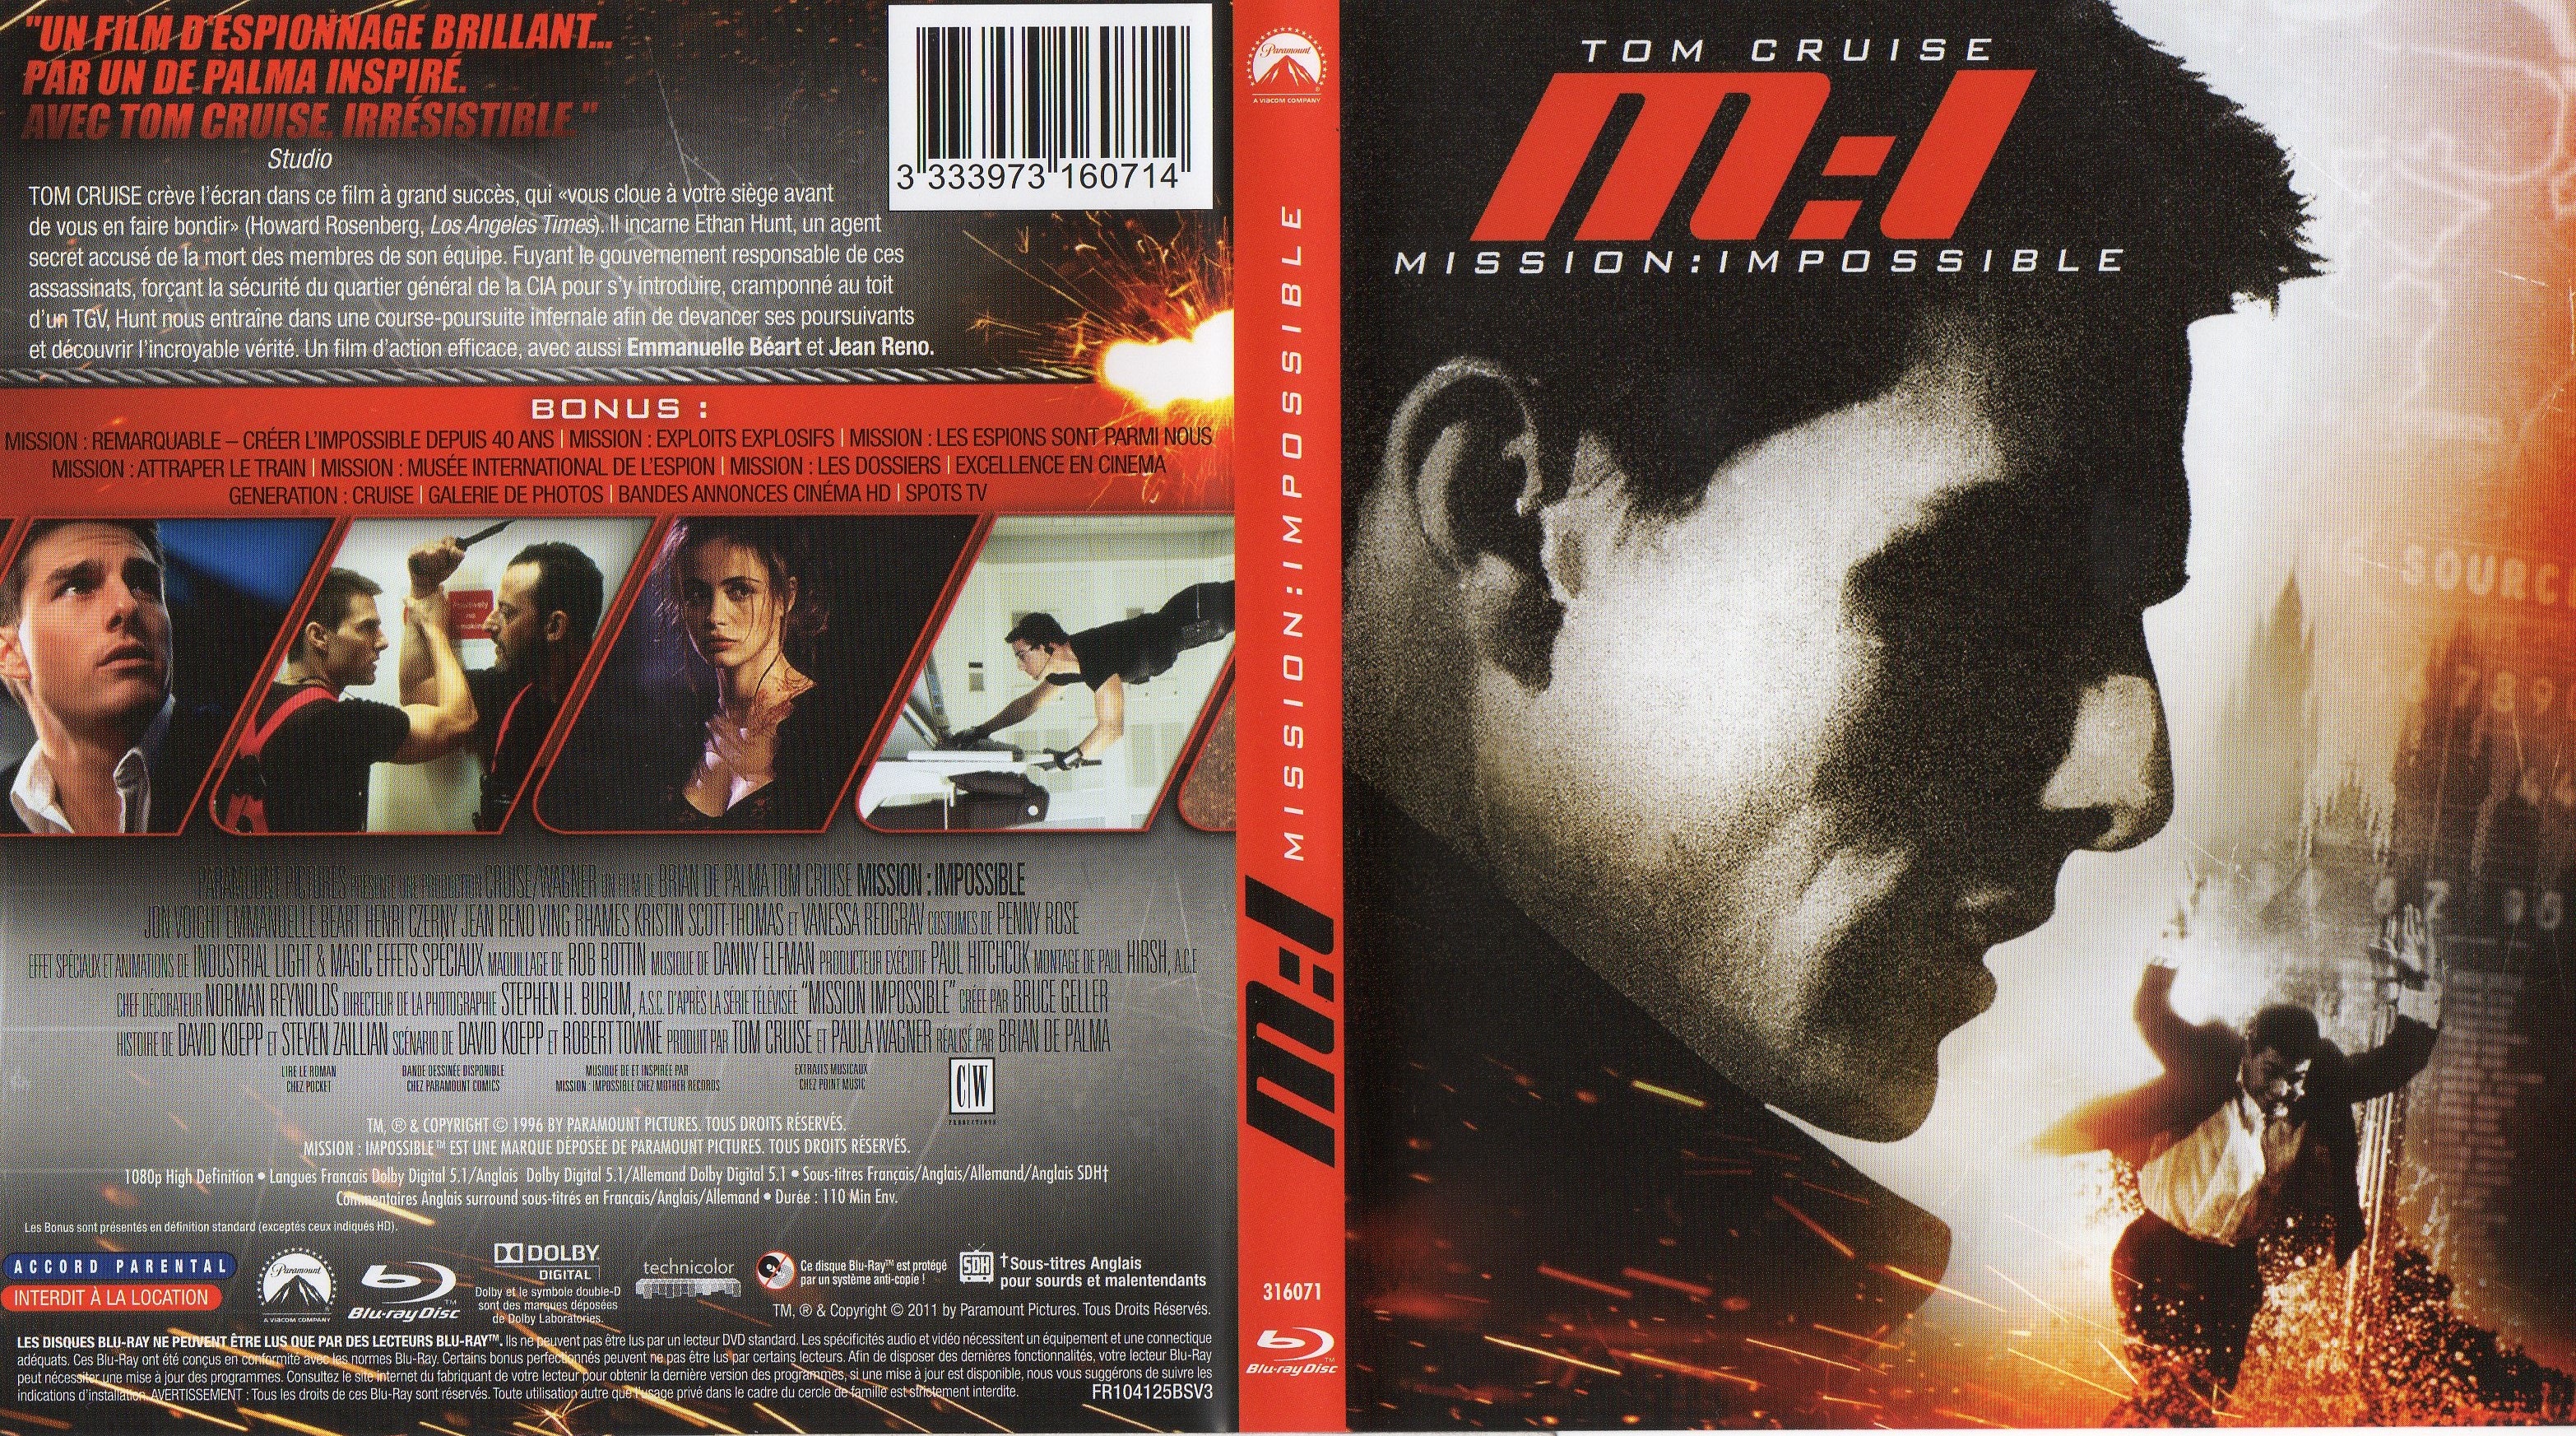 Jaquette DVD Mission impossible (BLU-RAY) v2